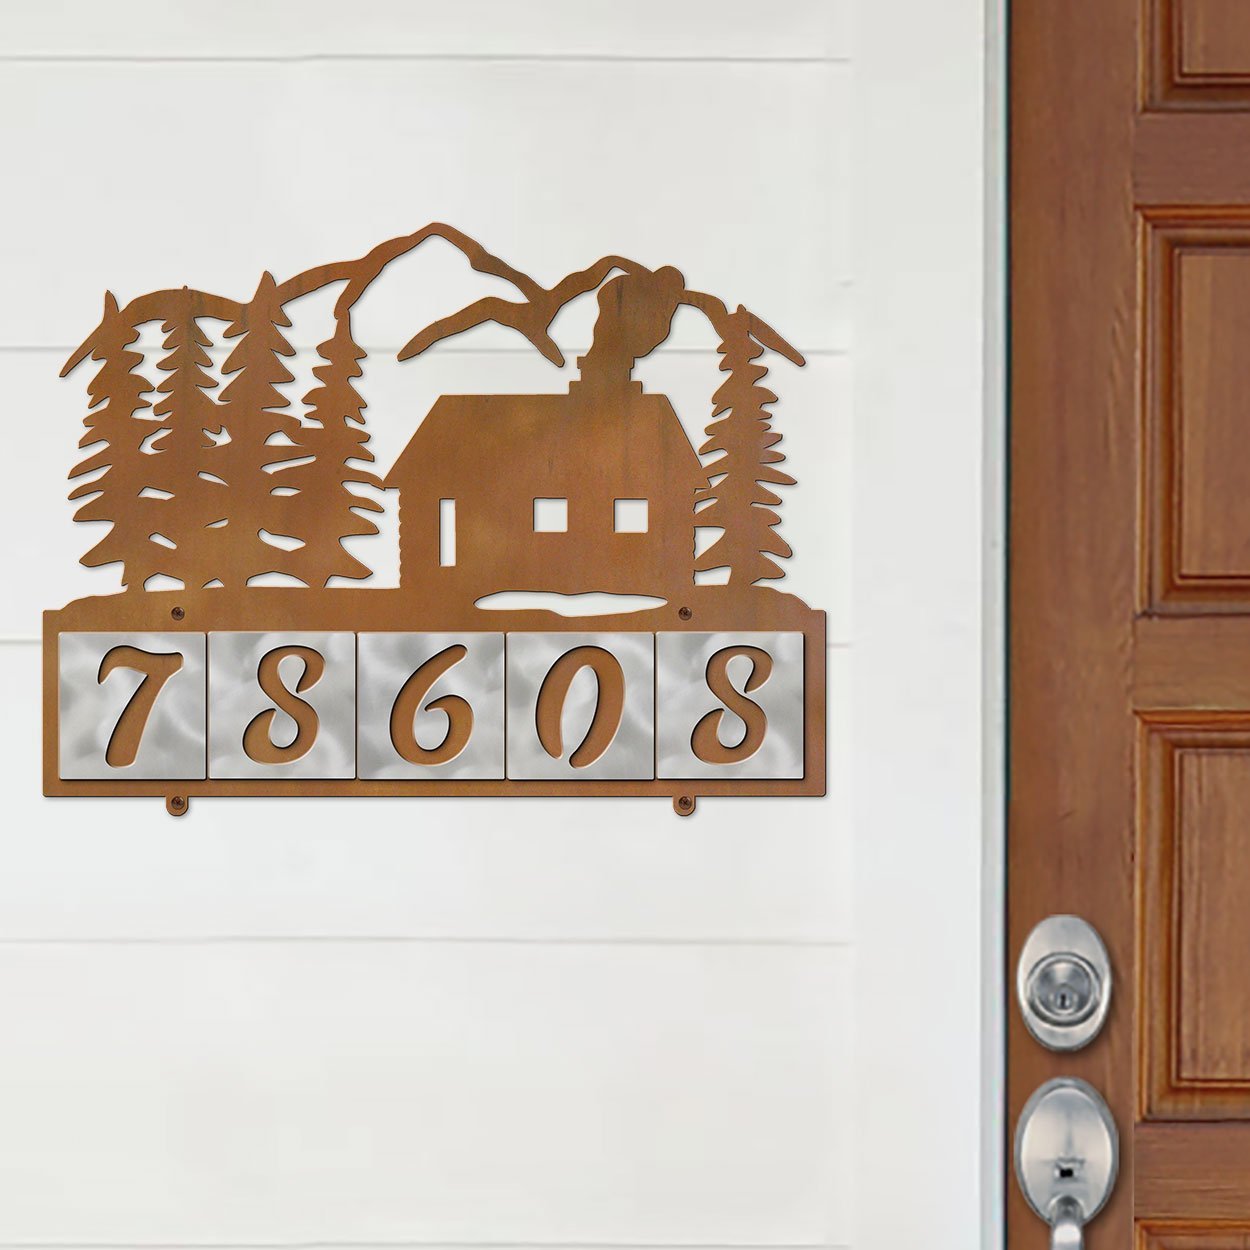 607075 - Cabin in the Woods Design 5-Digit Horizontal 4-inch Tile Outdoor House Numbers